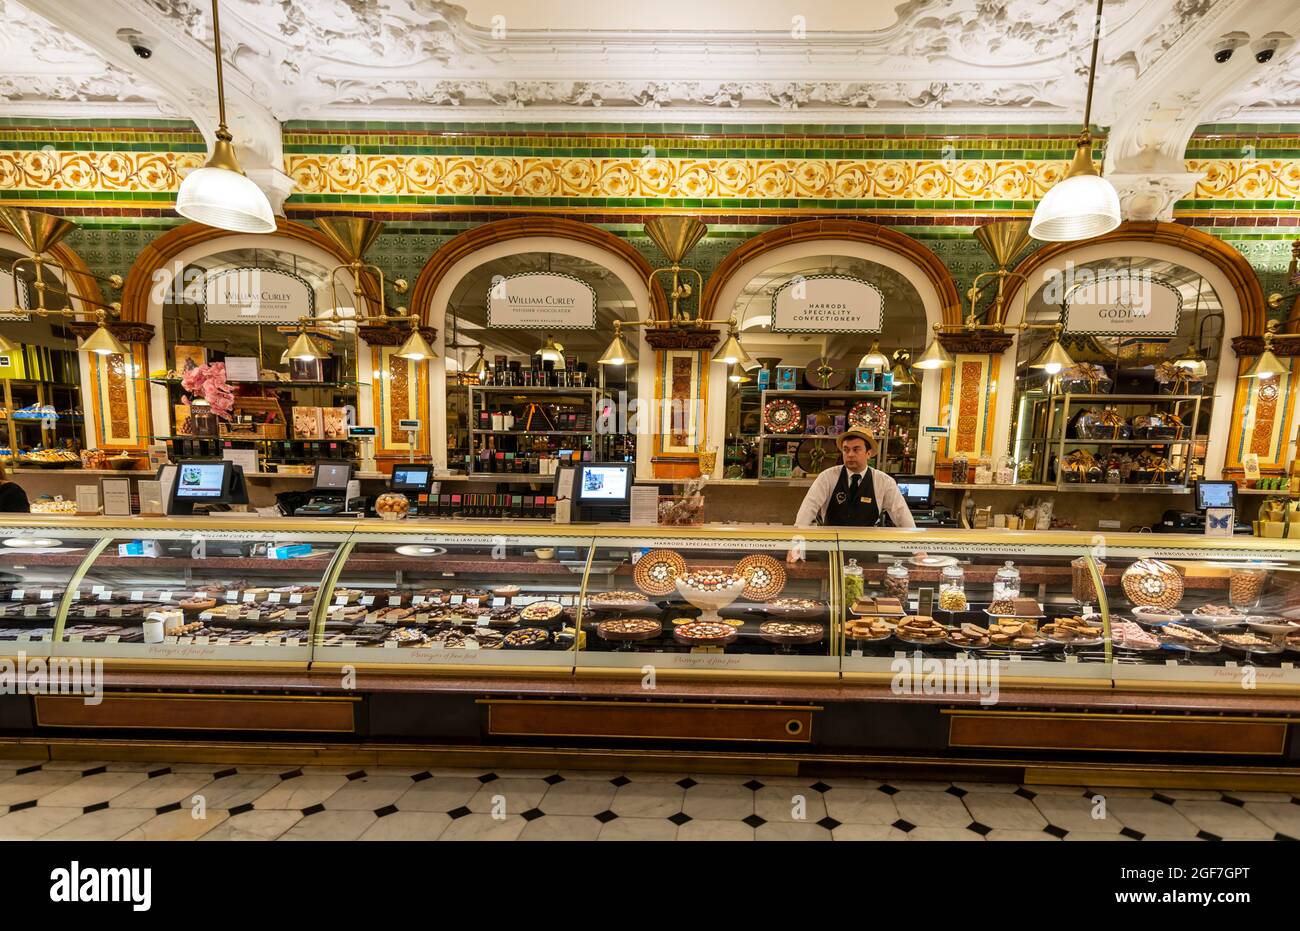 Counter with cakes and pastries, luxury department stores, Harrods, London, England, Great Britain Stock Photo